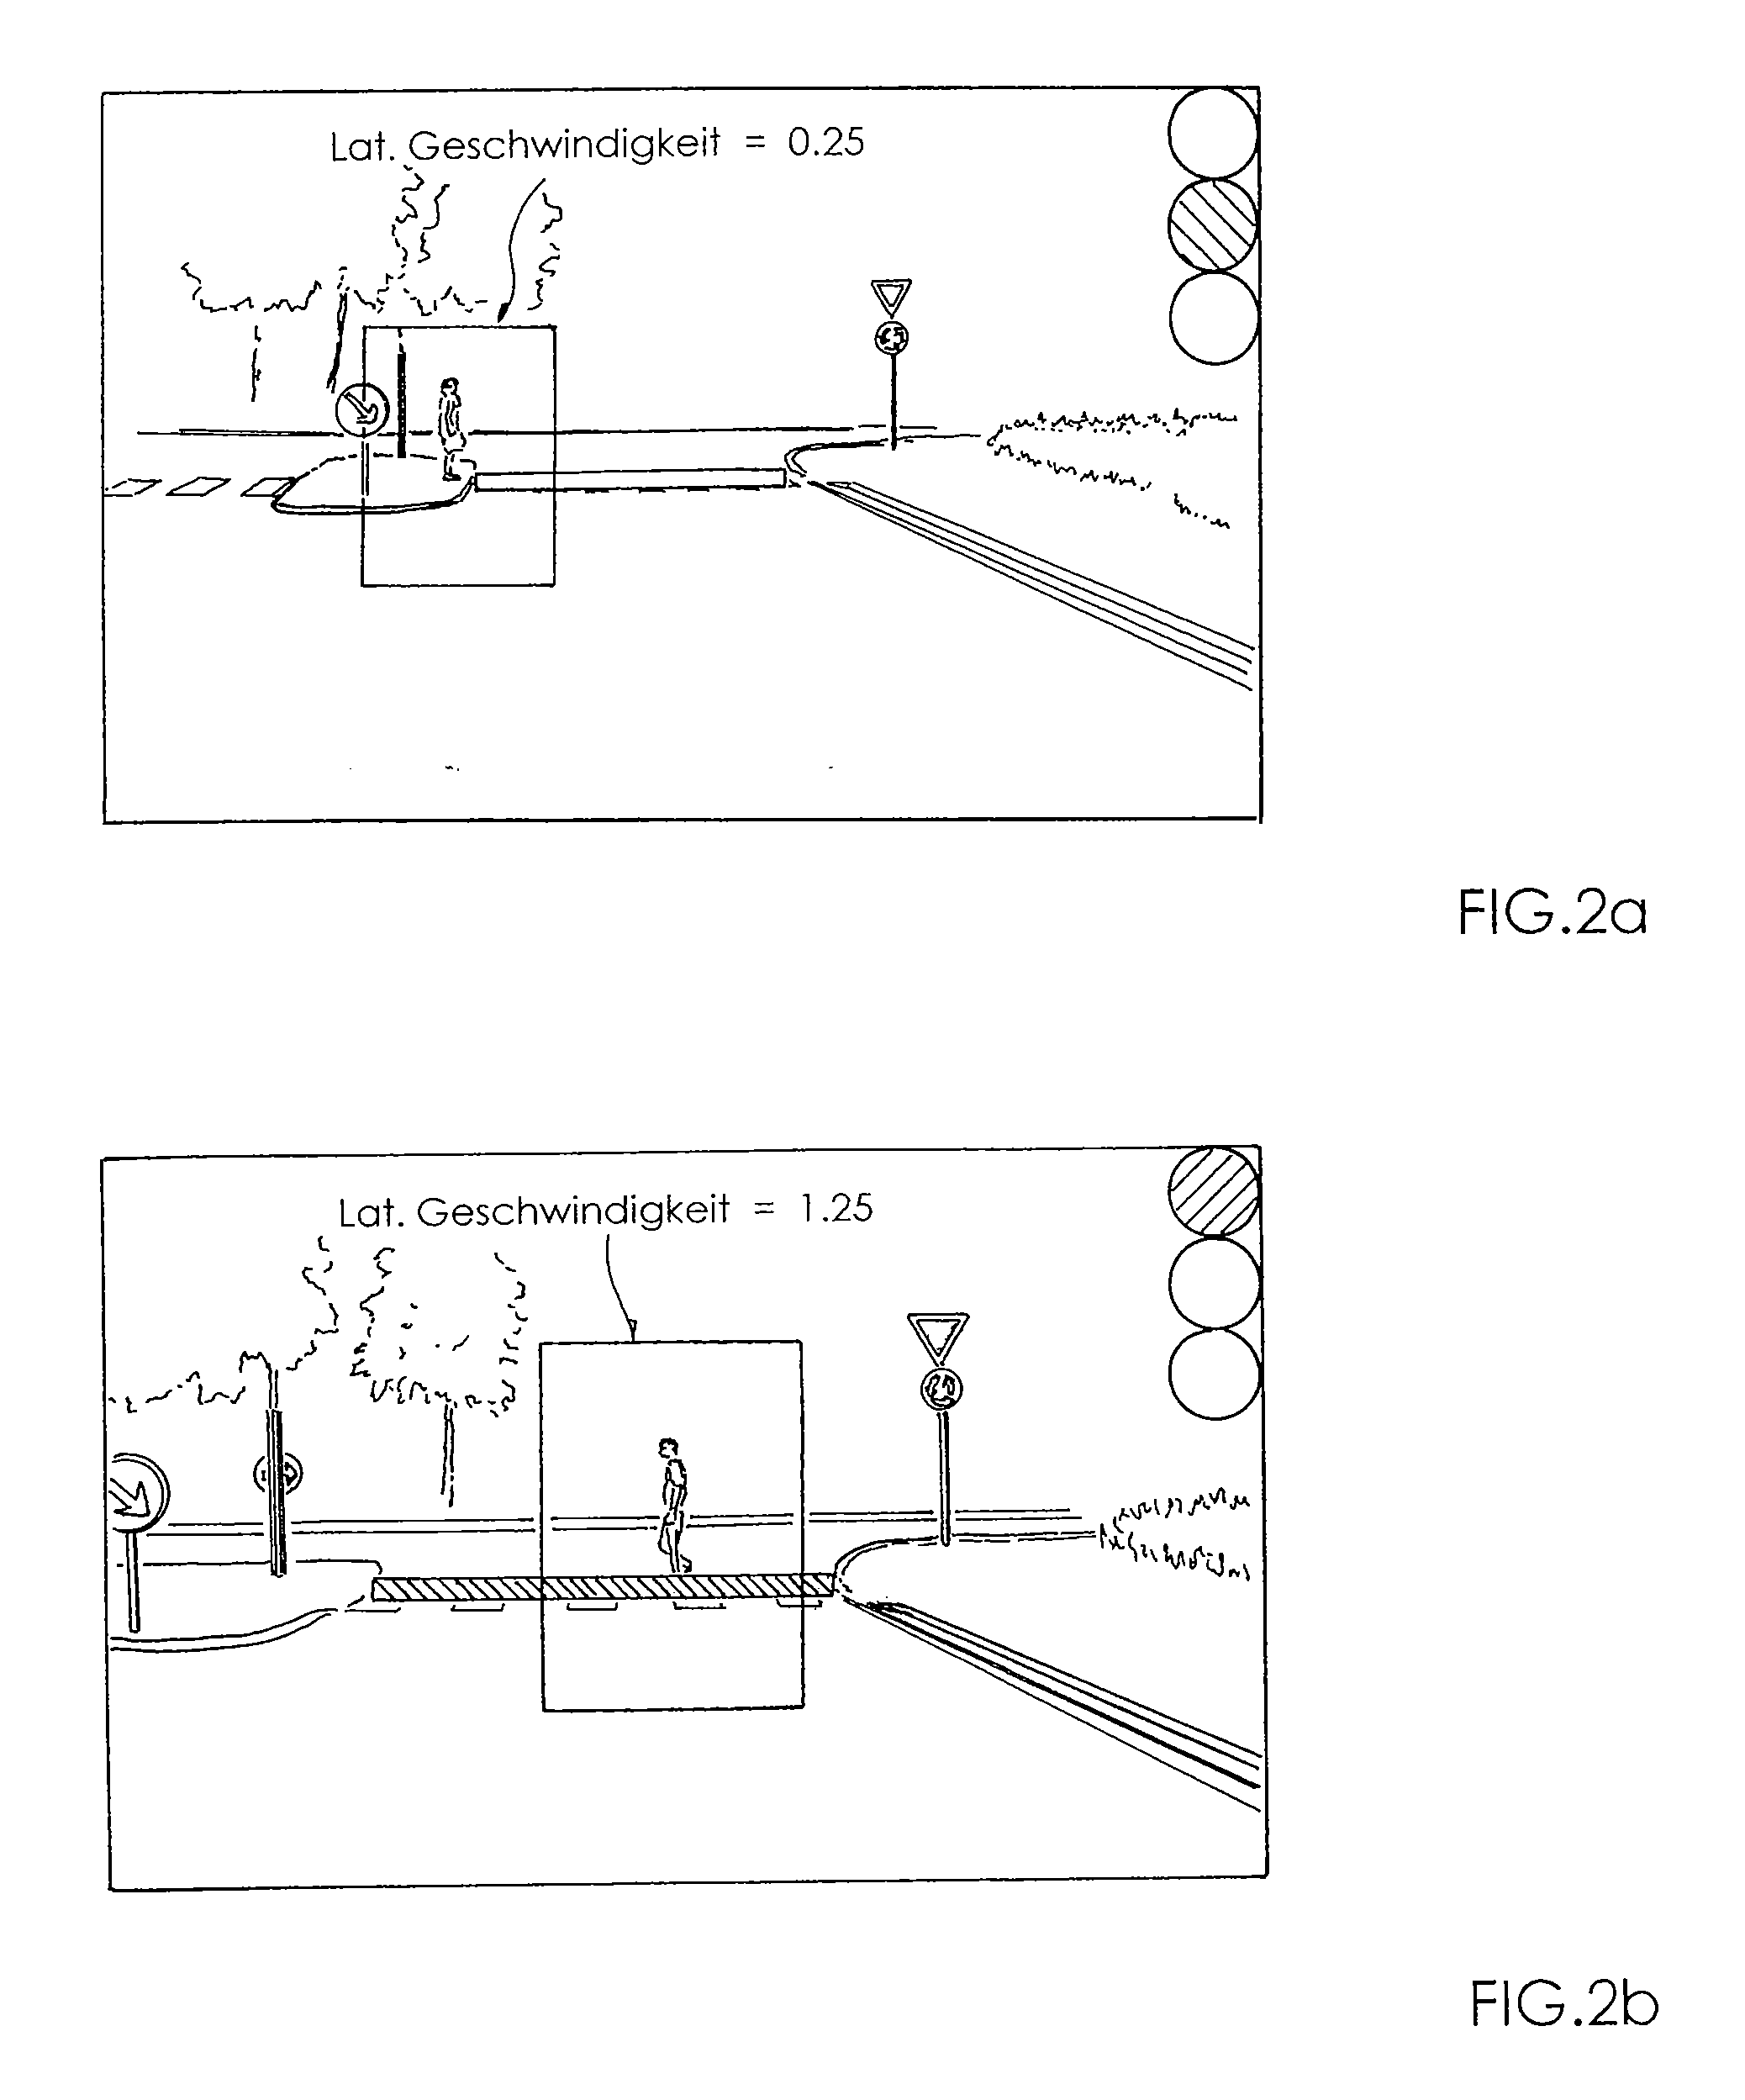 Driver assistance system for avoiding collisions of a vehicle with pedestrians